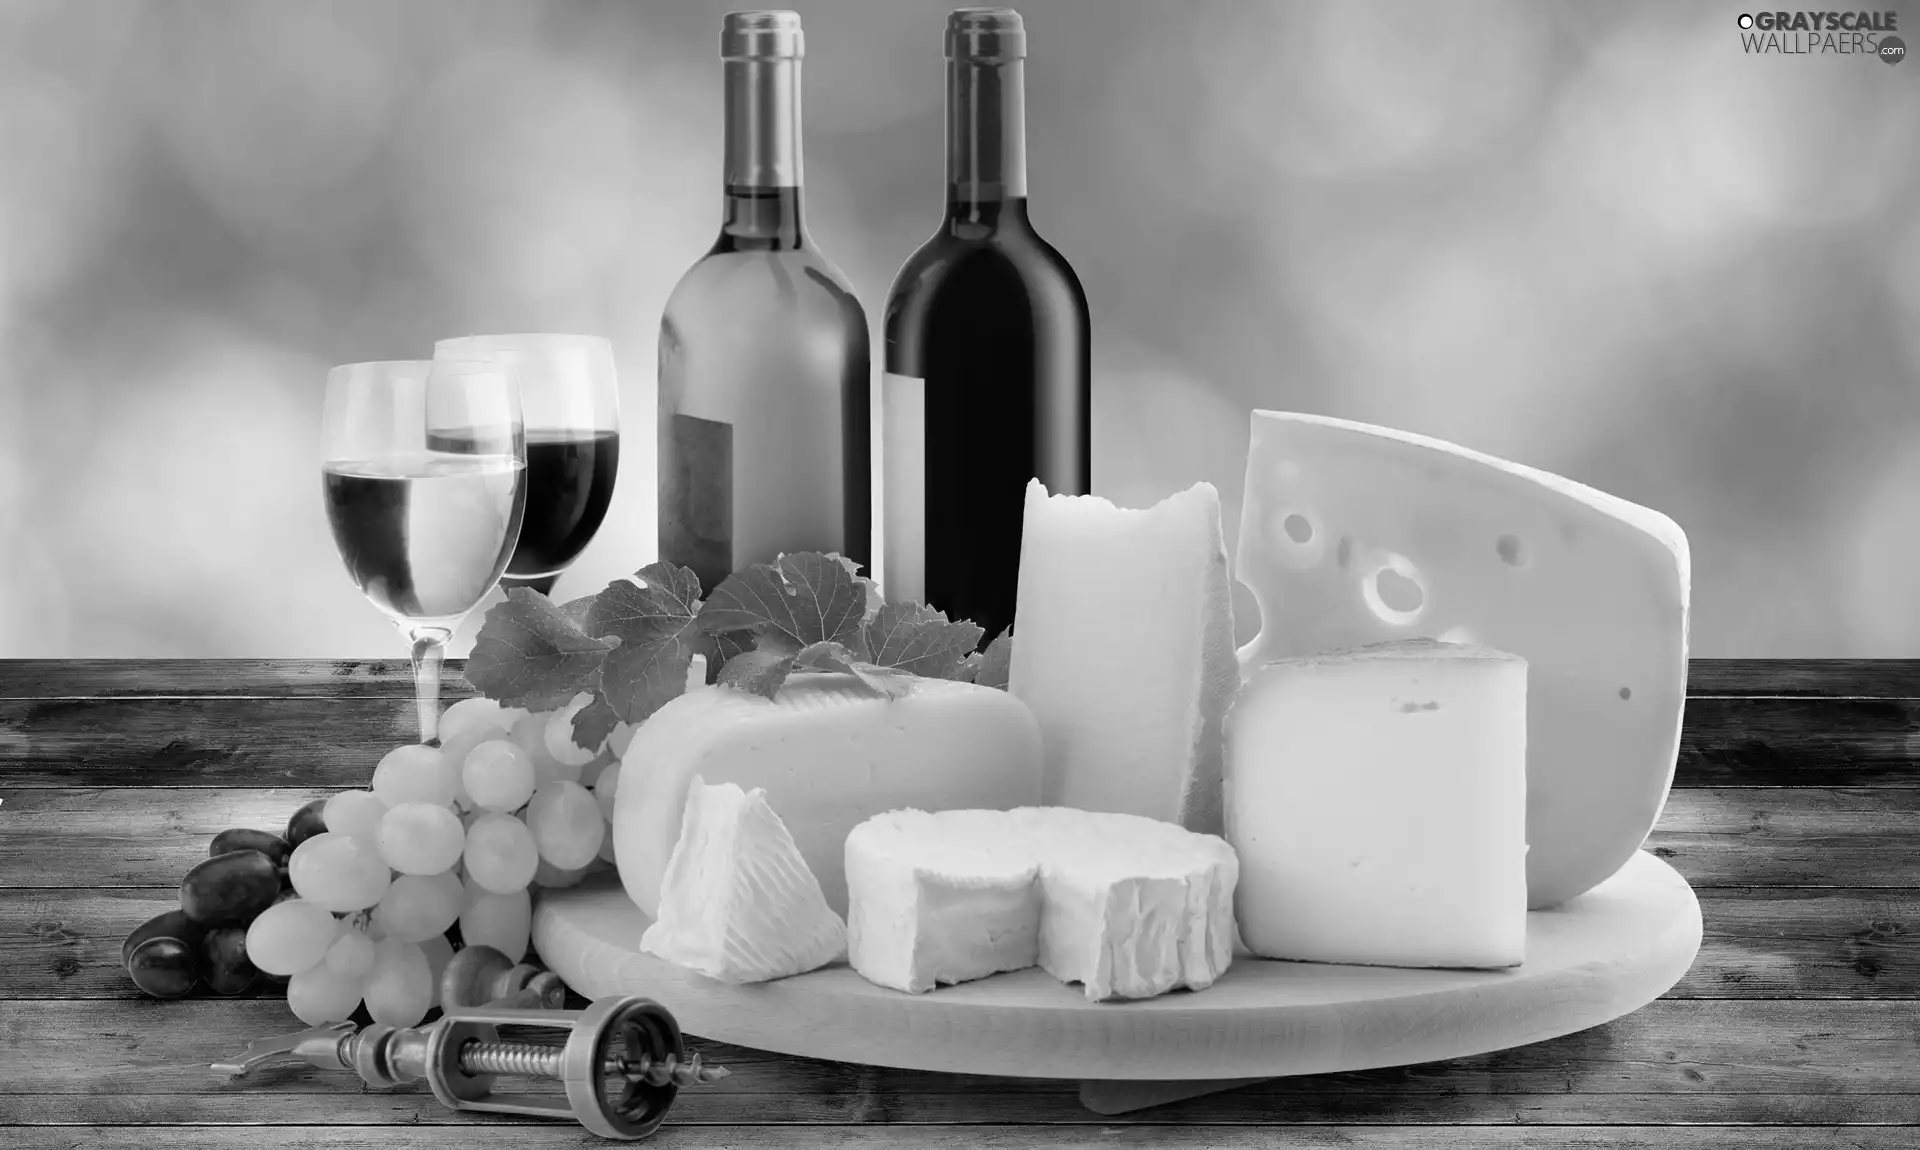 board, Wine, Grapes, glasses, Bottles, Cheese, composition